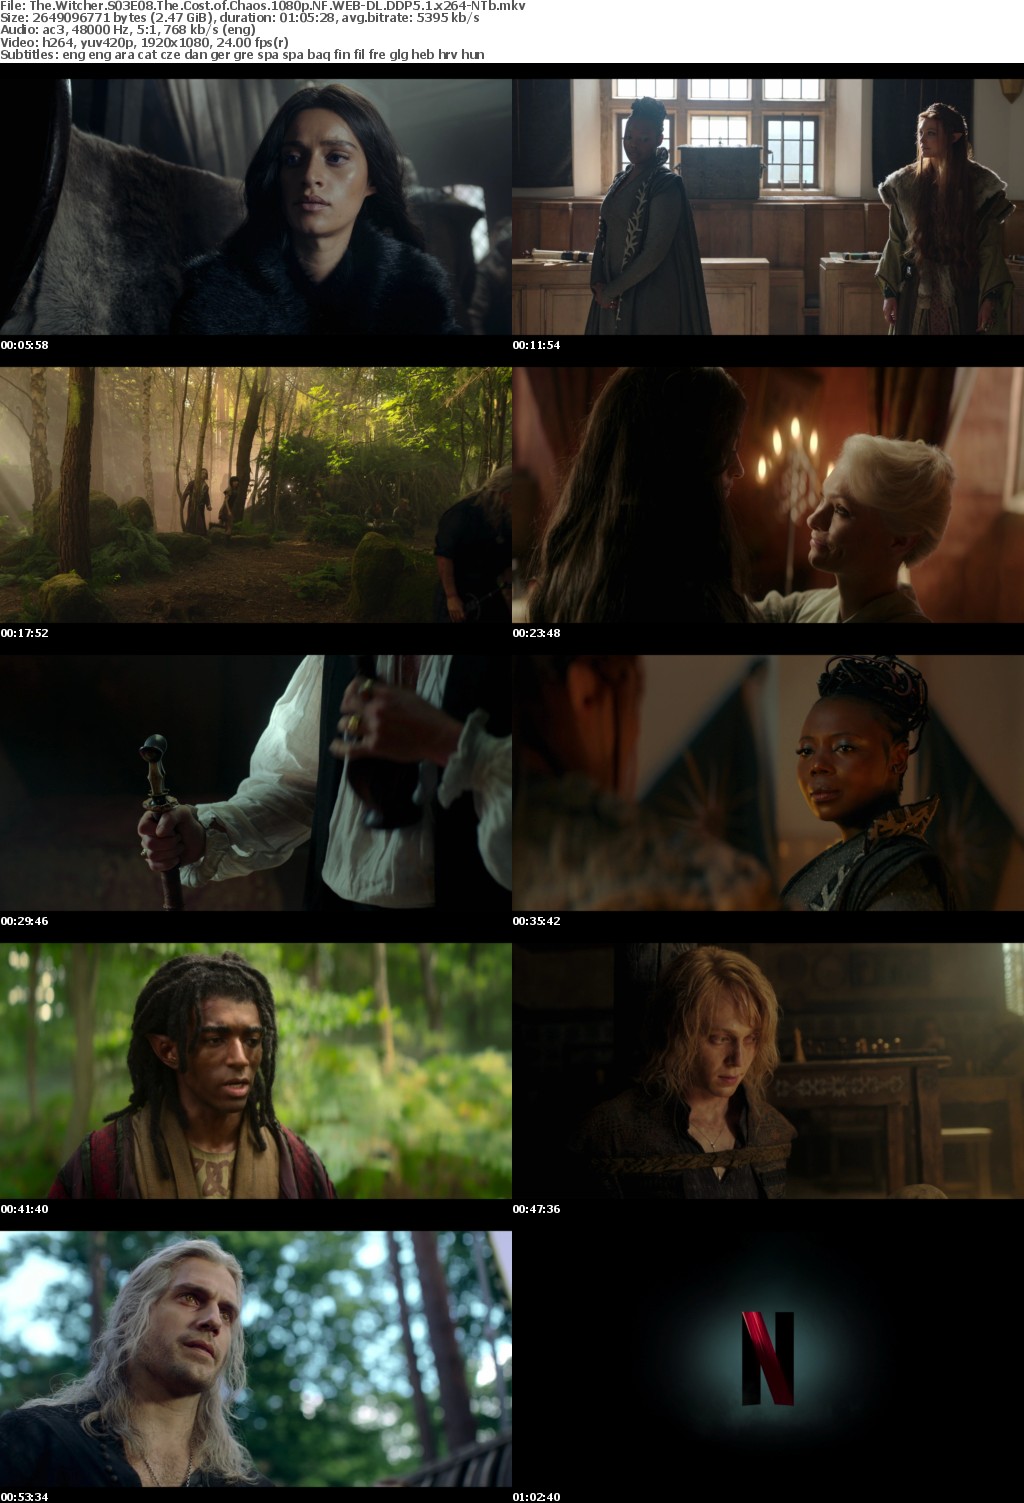 The Witcher S03E08 The Cost of Chaos 1080p NF WEB-DL DDP5 1 x264-NTb